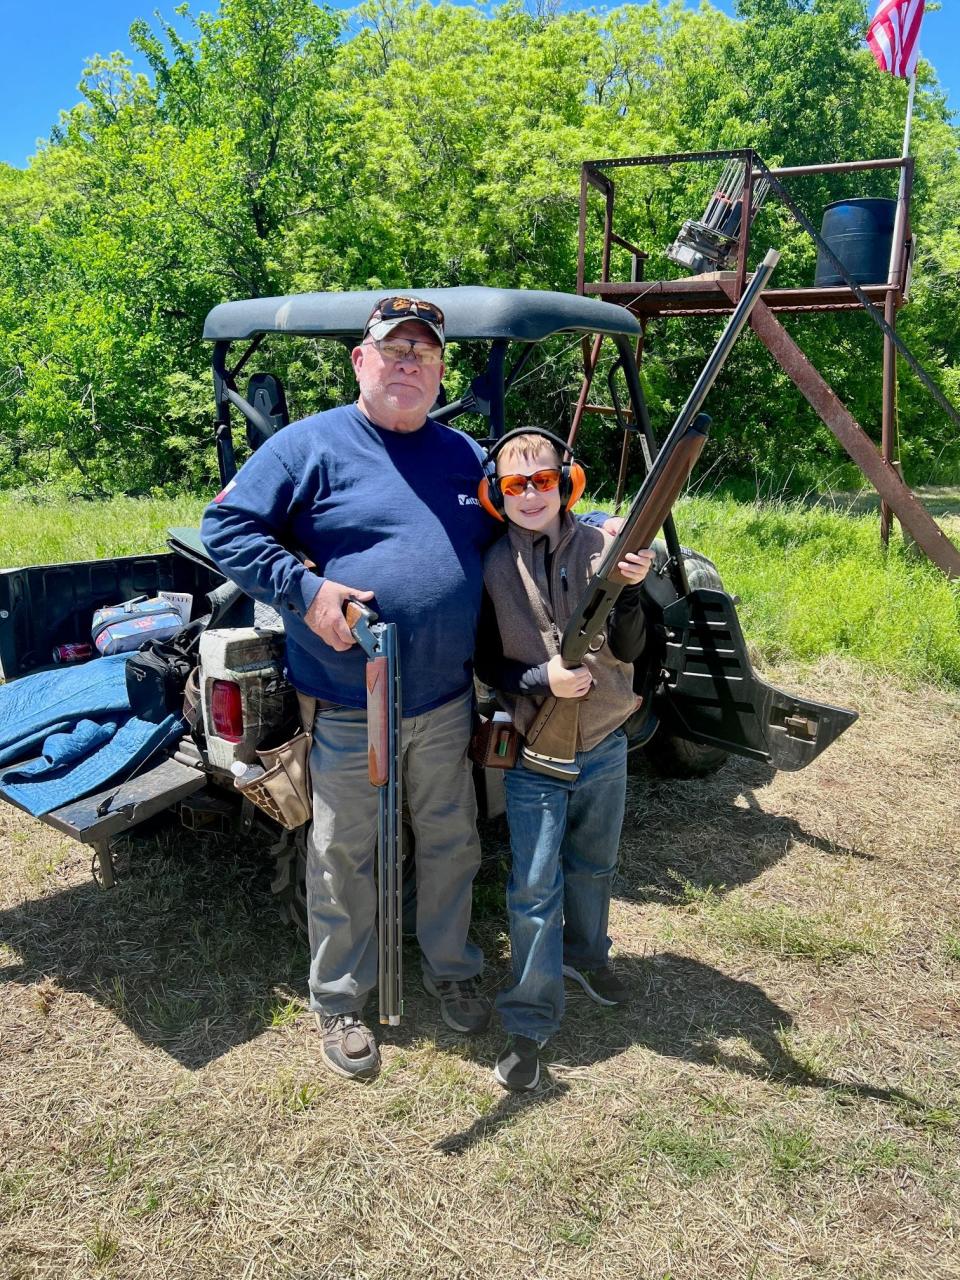 Elvin Clayton and his grandson, Clayton Kaspar at the April 29 Southwest Rotary Sporting Clay Shoot. Clayton has been shooting for a few months and was the youngest shooter at the event.